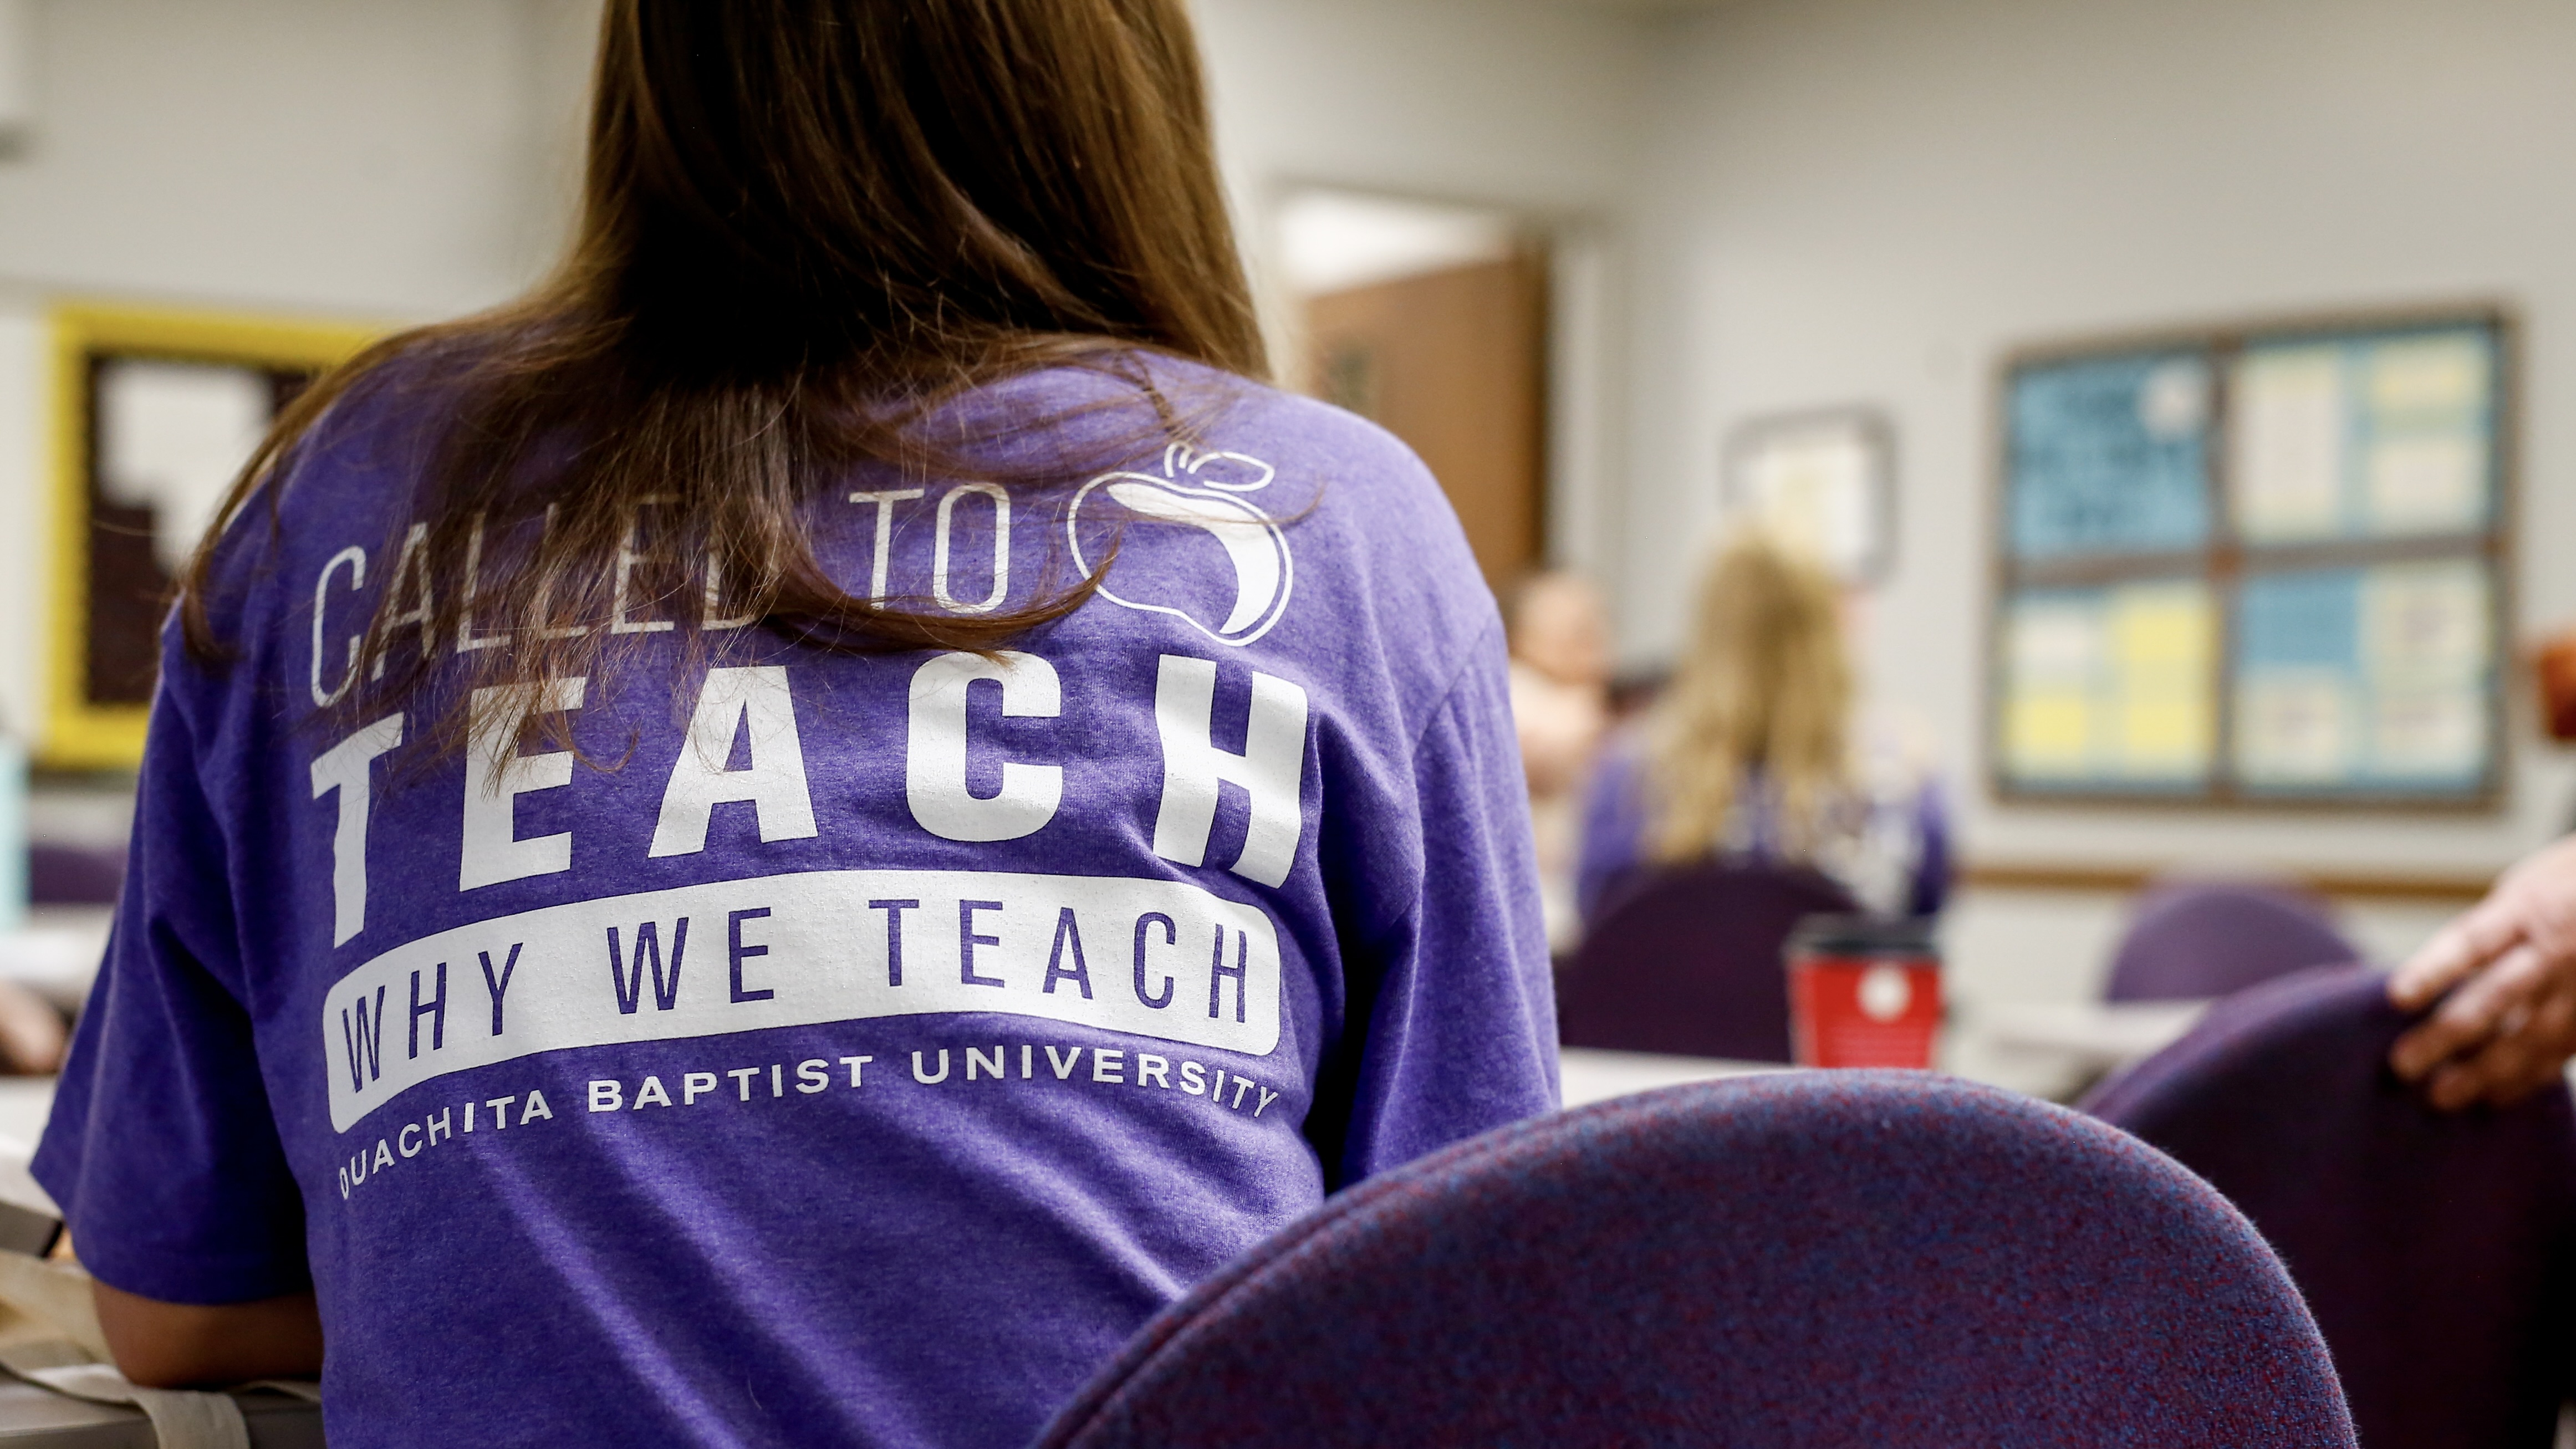 Called to Teach Conference at Ouachita Baptist University